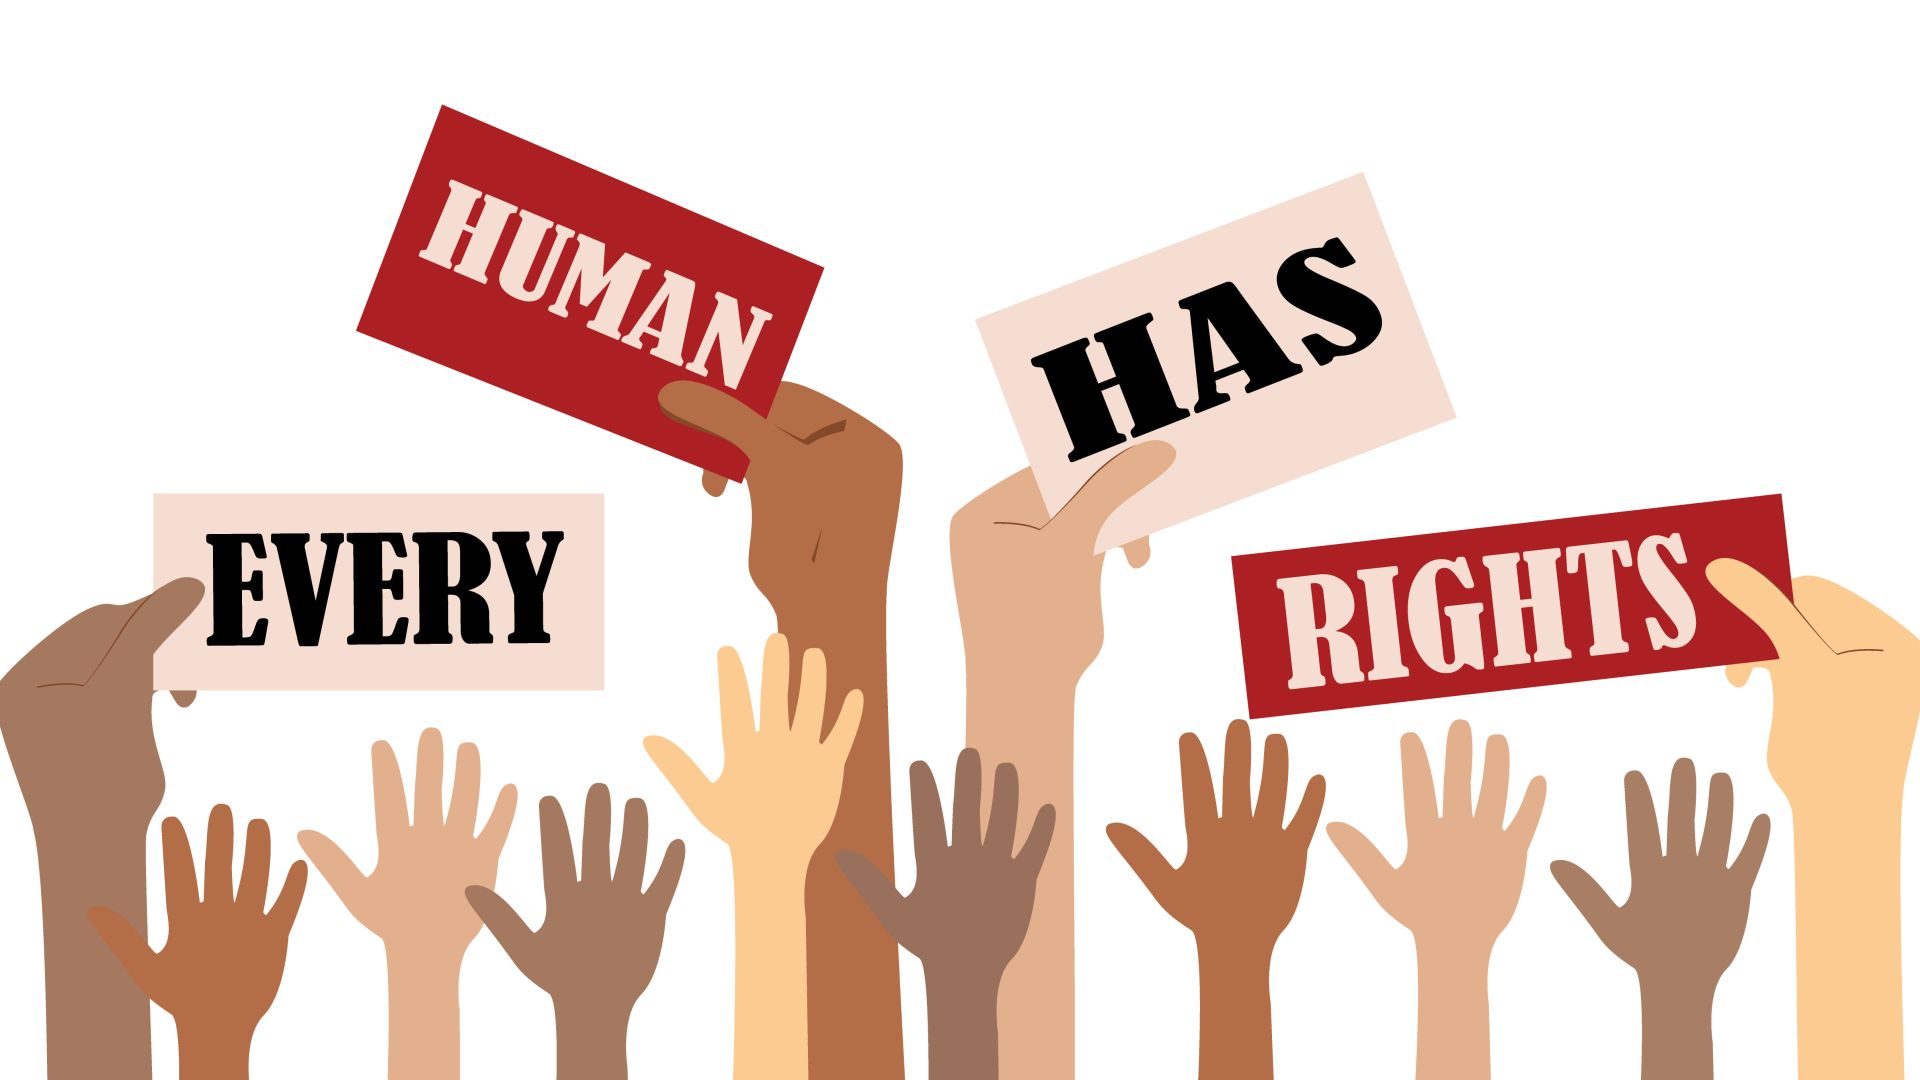 every human has rights hands in air